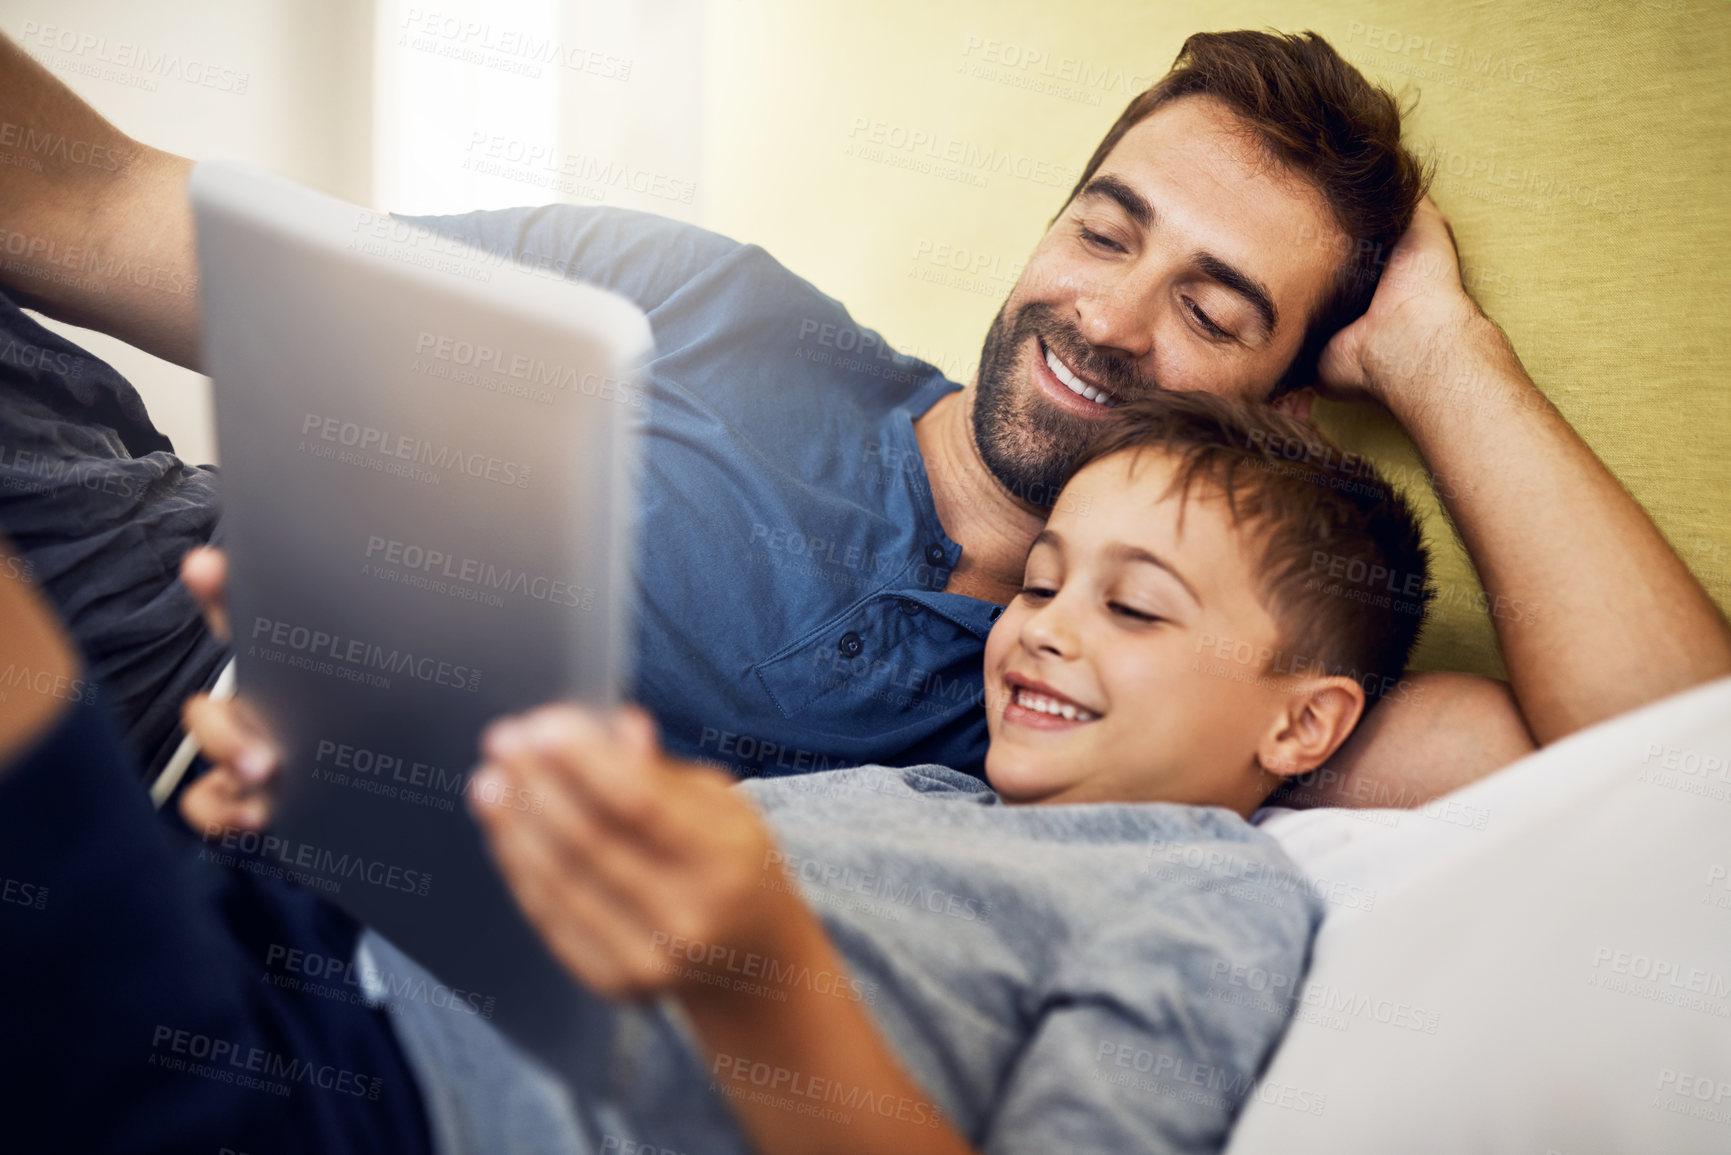 Buy stock photo Shot of a young man using a digital tablet with his son at home